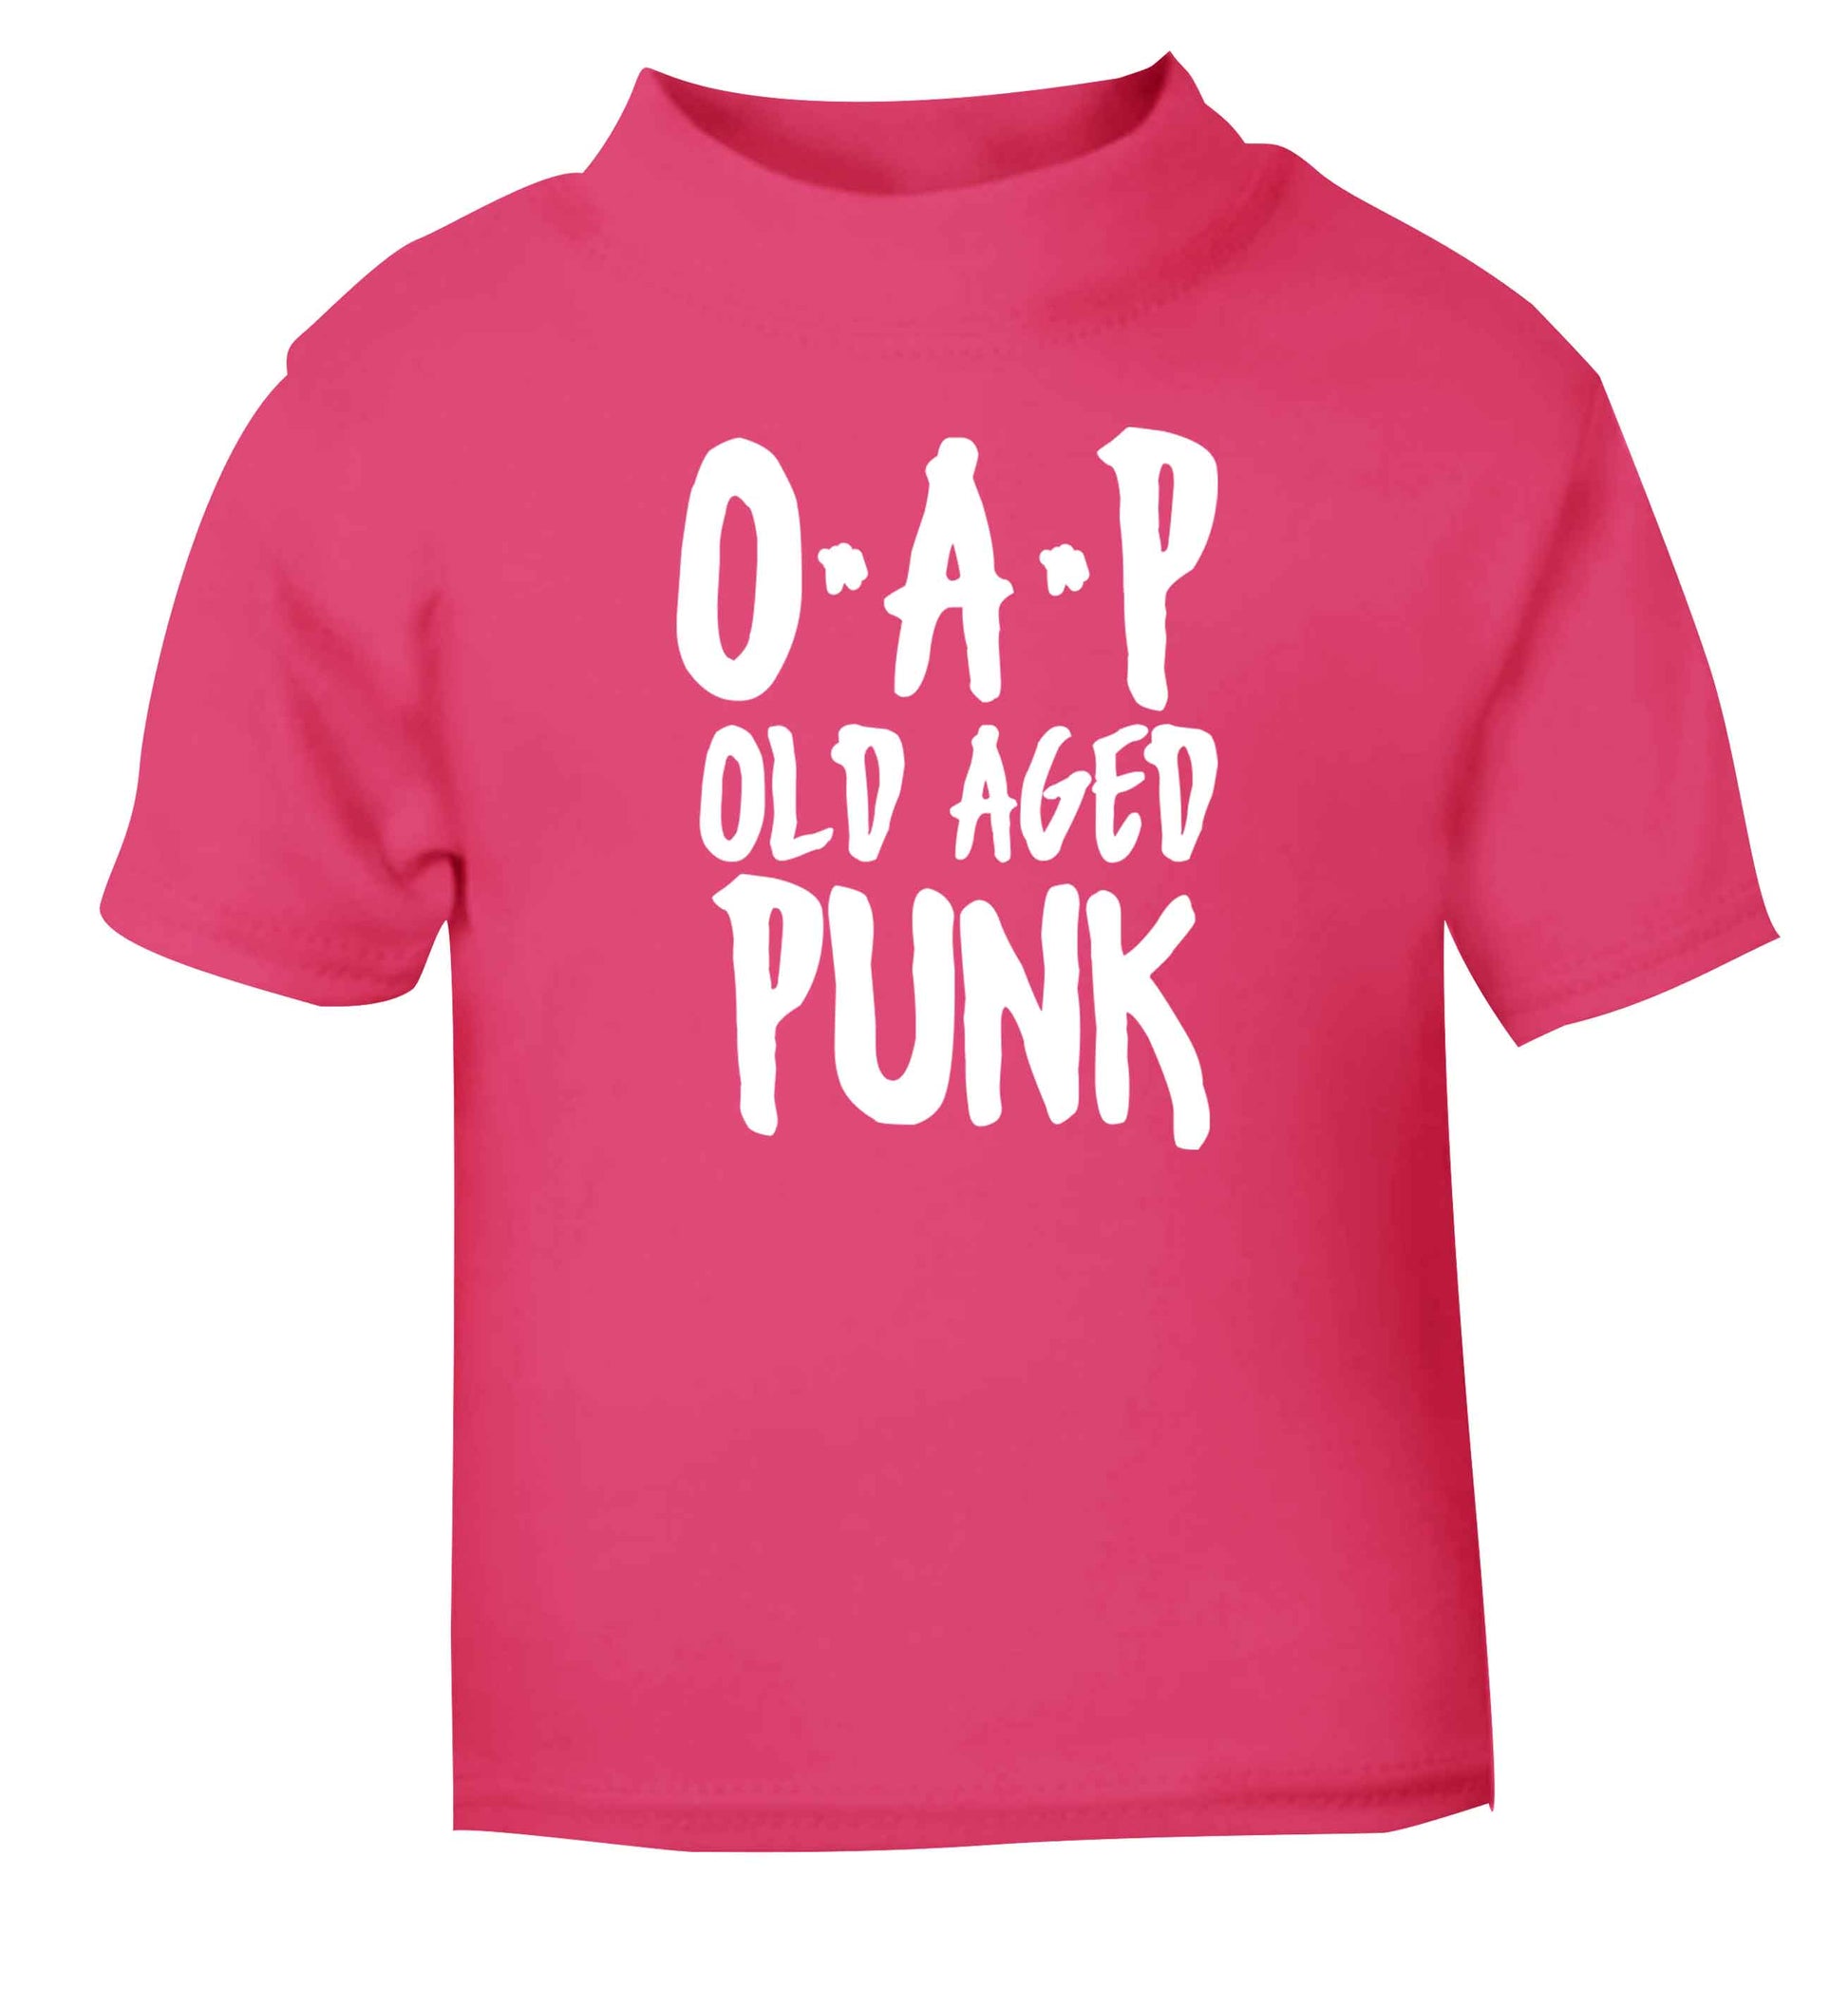 O.A.P Old Age Punk pink Baby Toddler Tshirt 2 Years